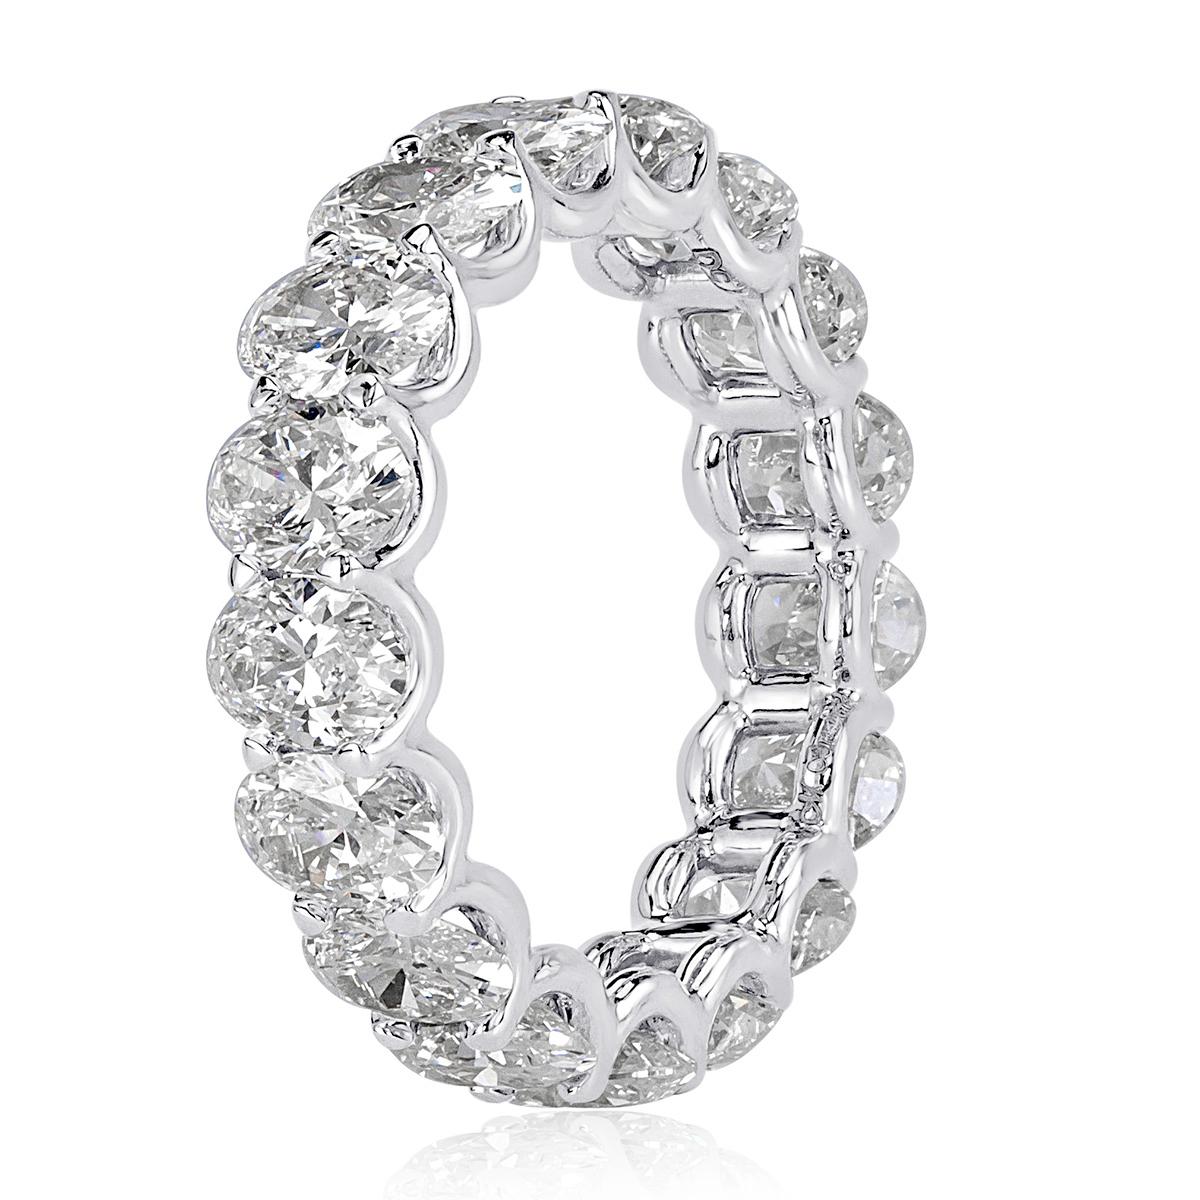 Handcrafted in high polish platinum, this diamond eternity band showcases 5.42ct of oval cut diamonds graded at E-F in color, VS1-VS2 in clarity. The diamonds are set in a 